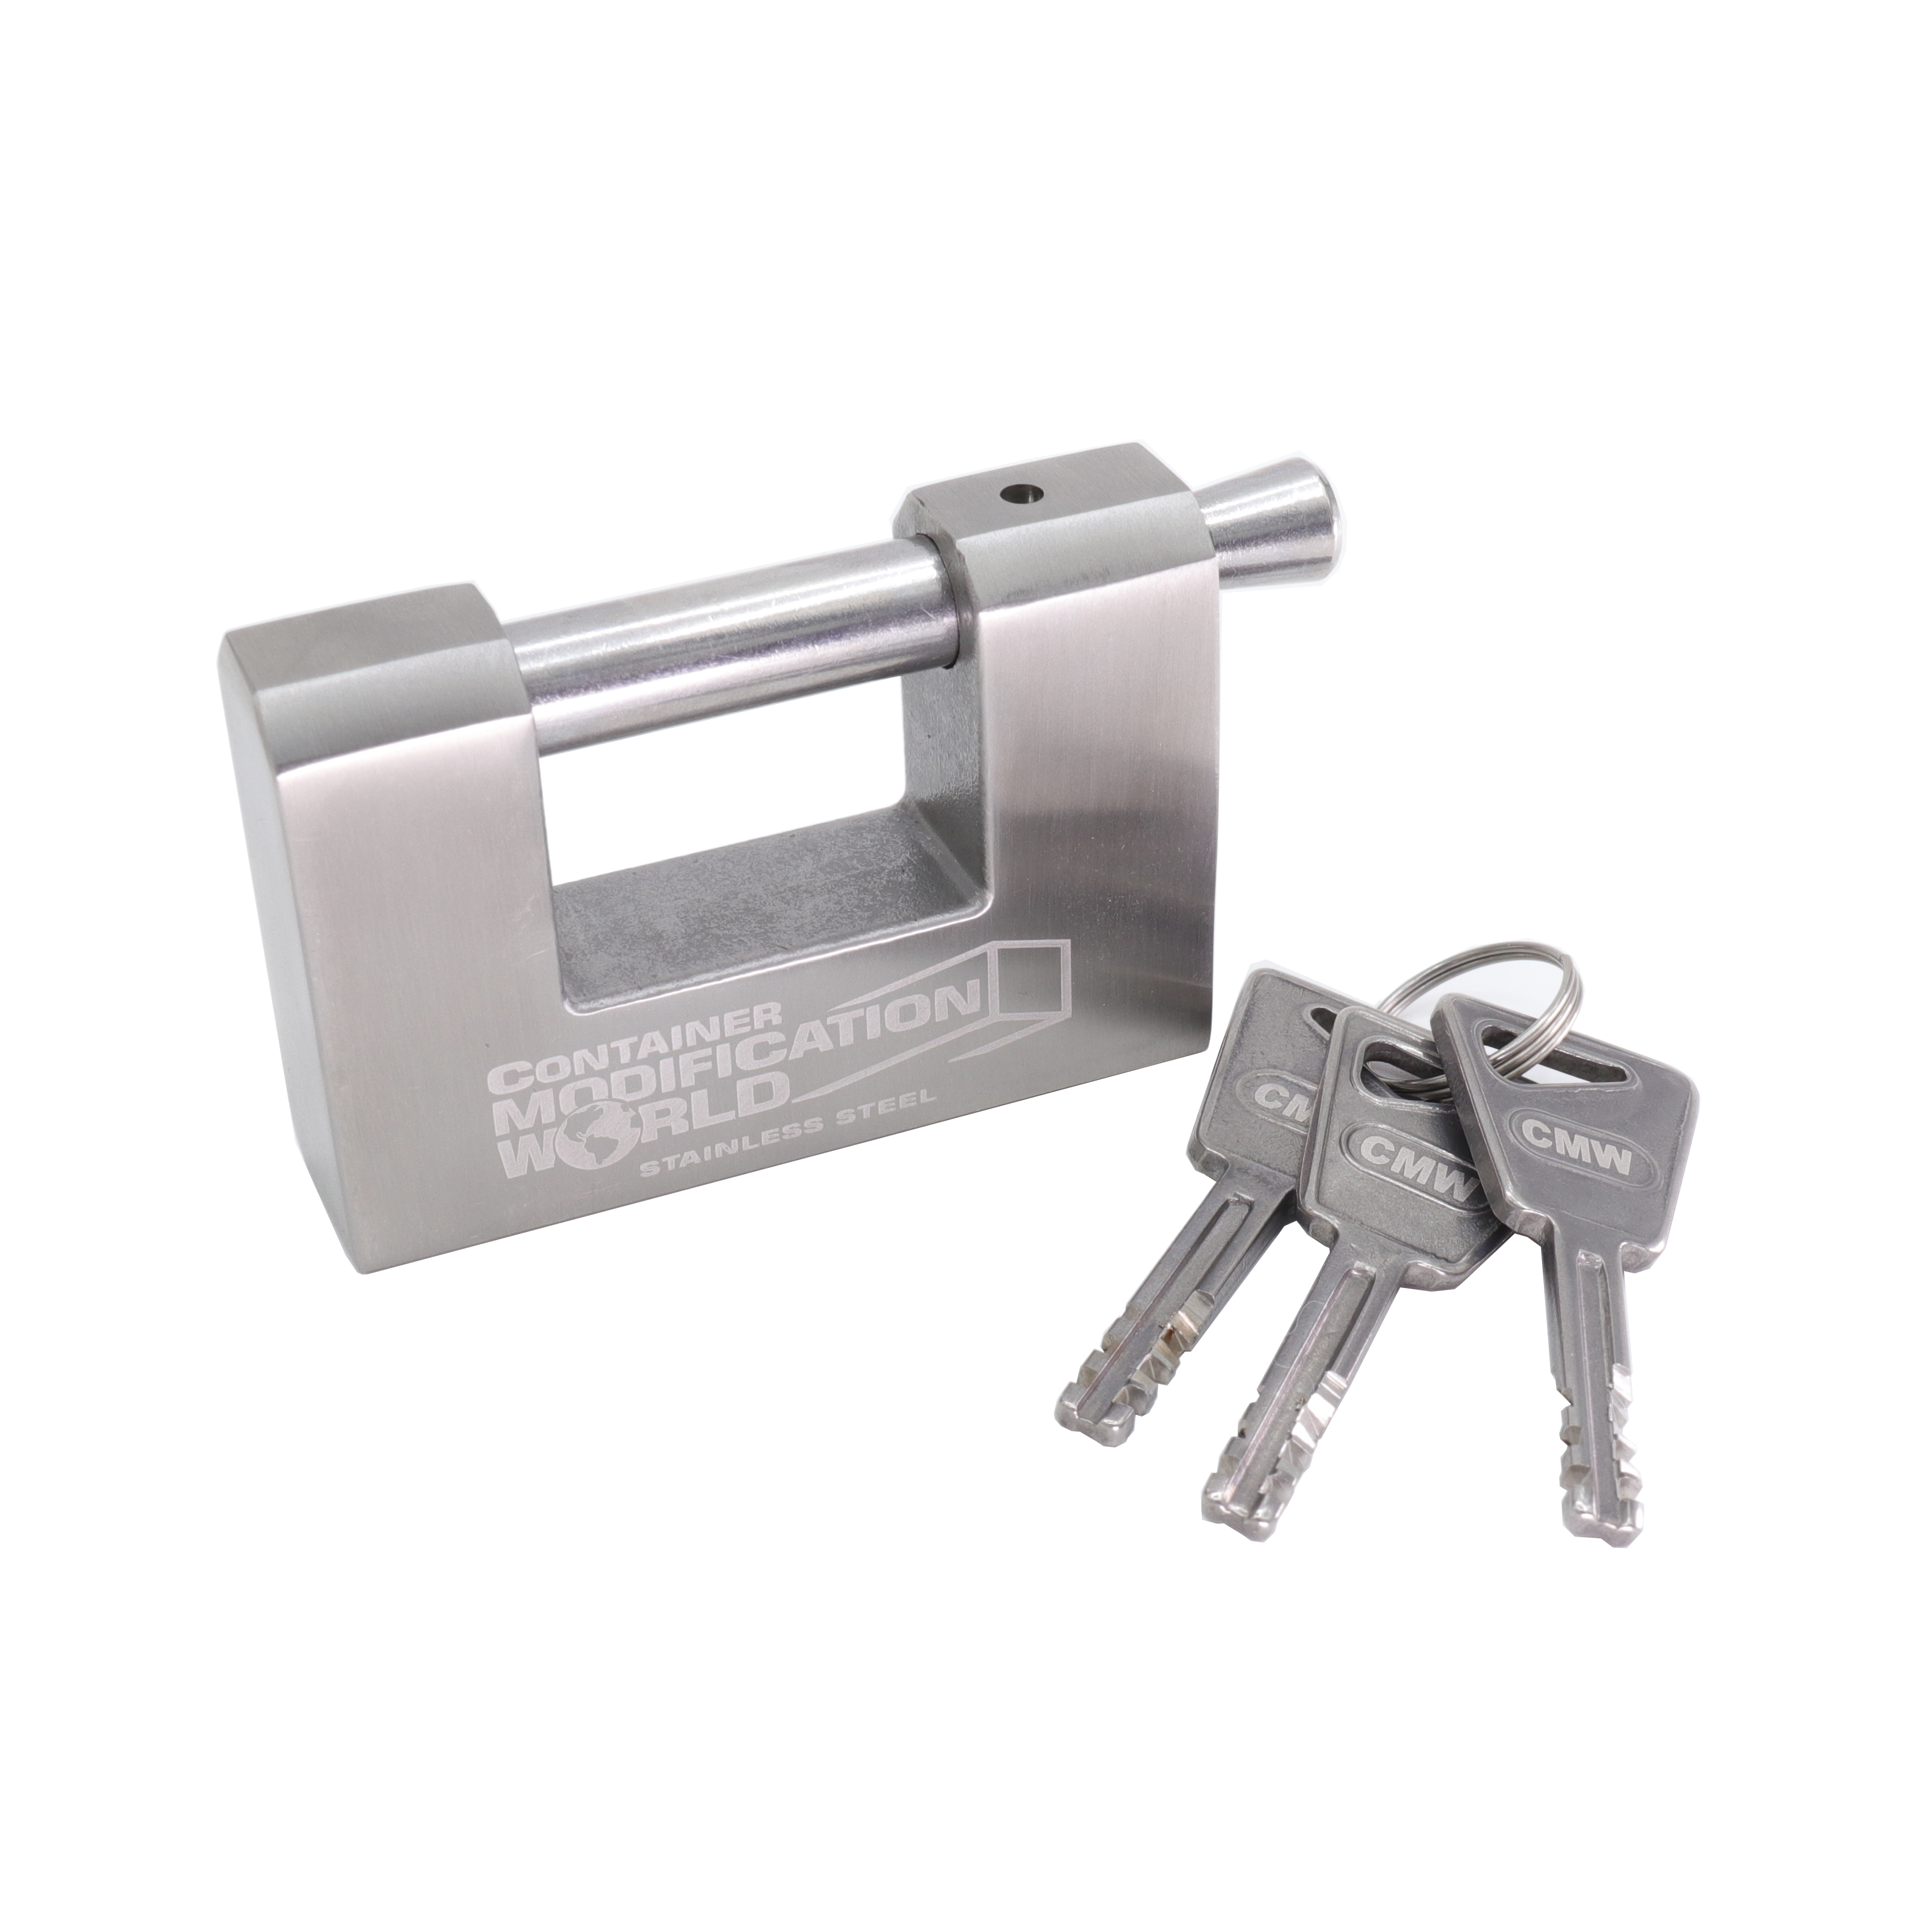 Shackle Block Lock: Ideal for one-time-use shipping containers